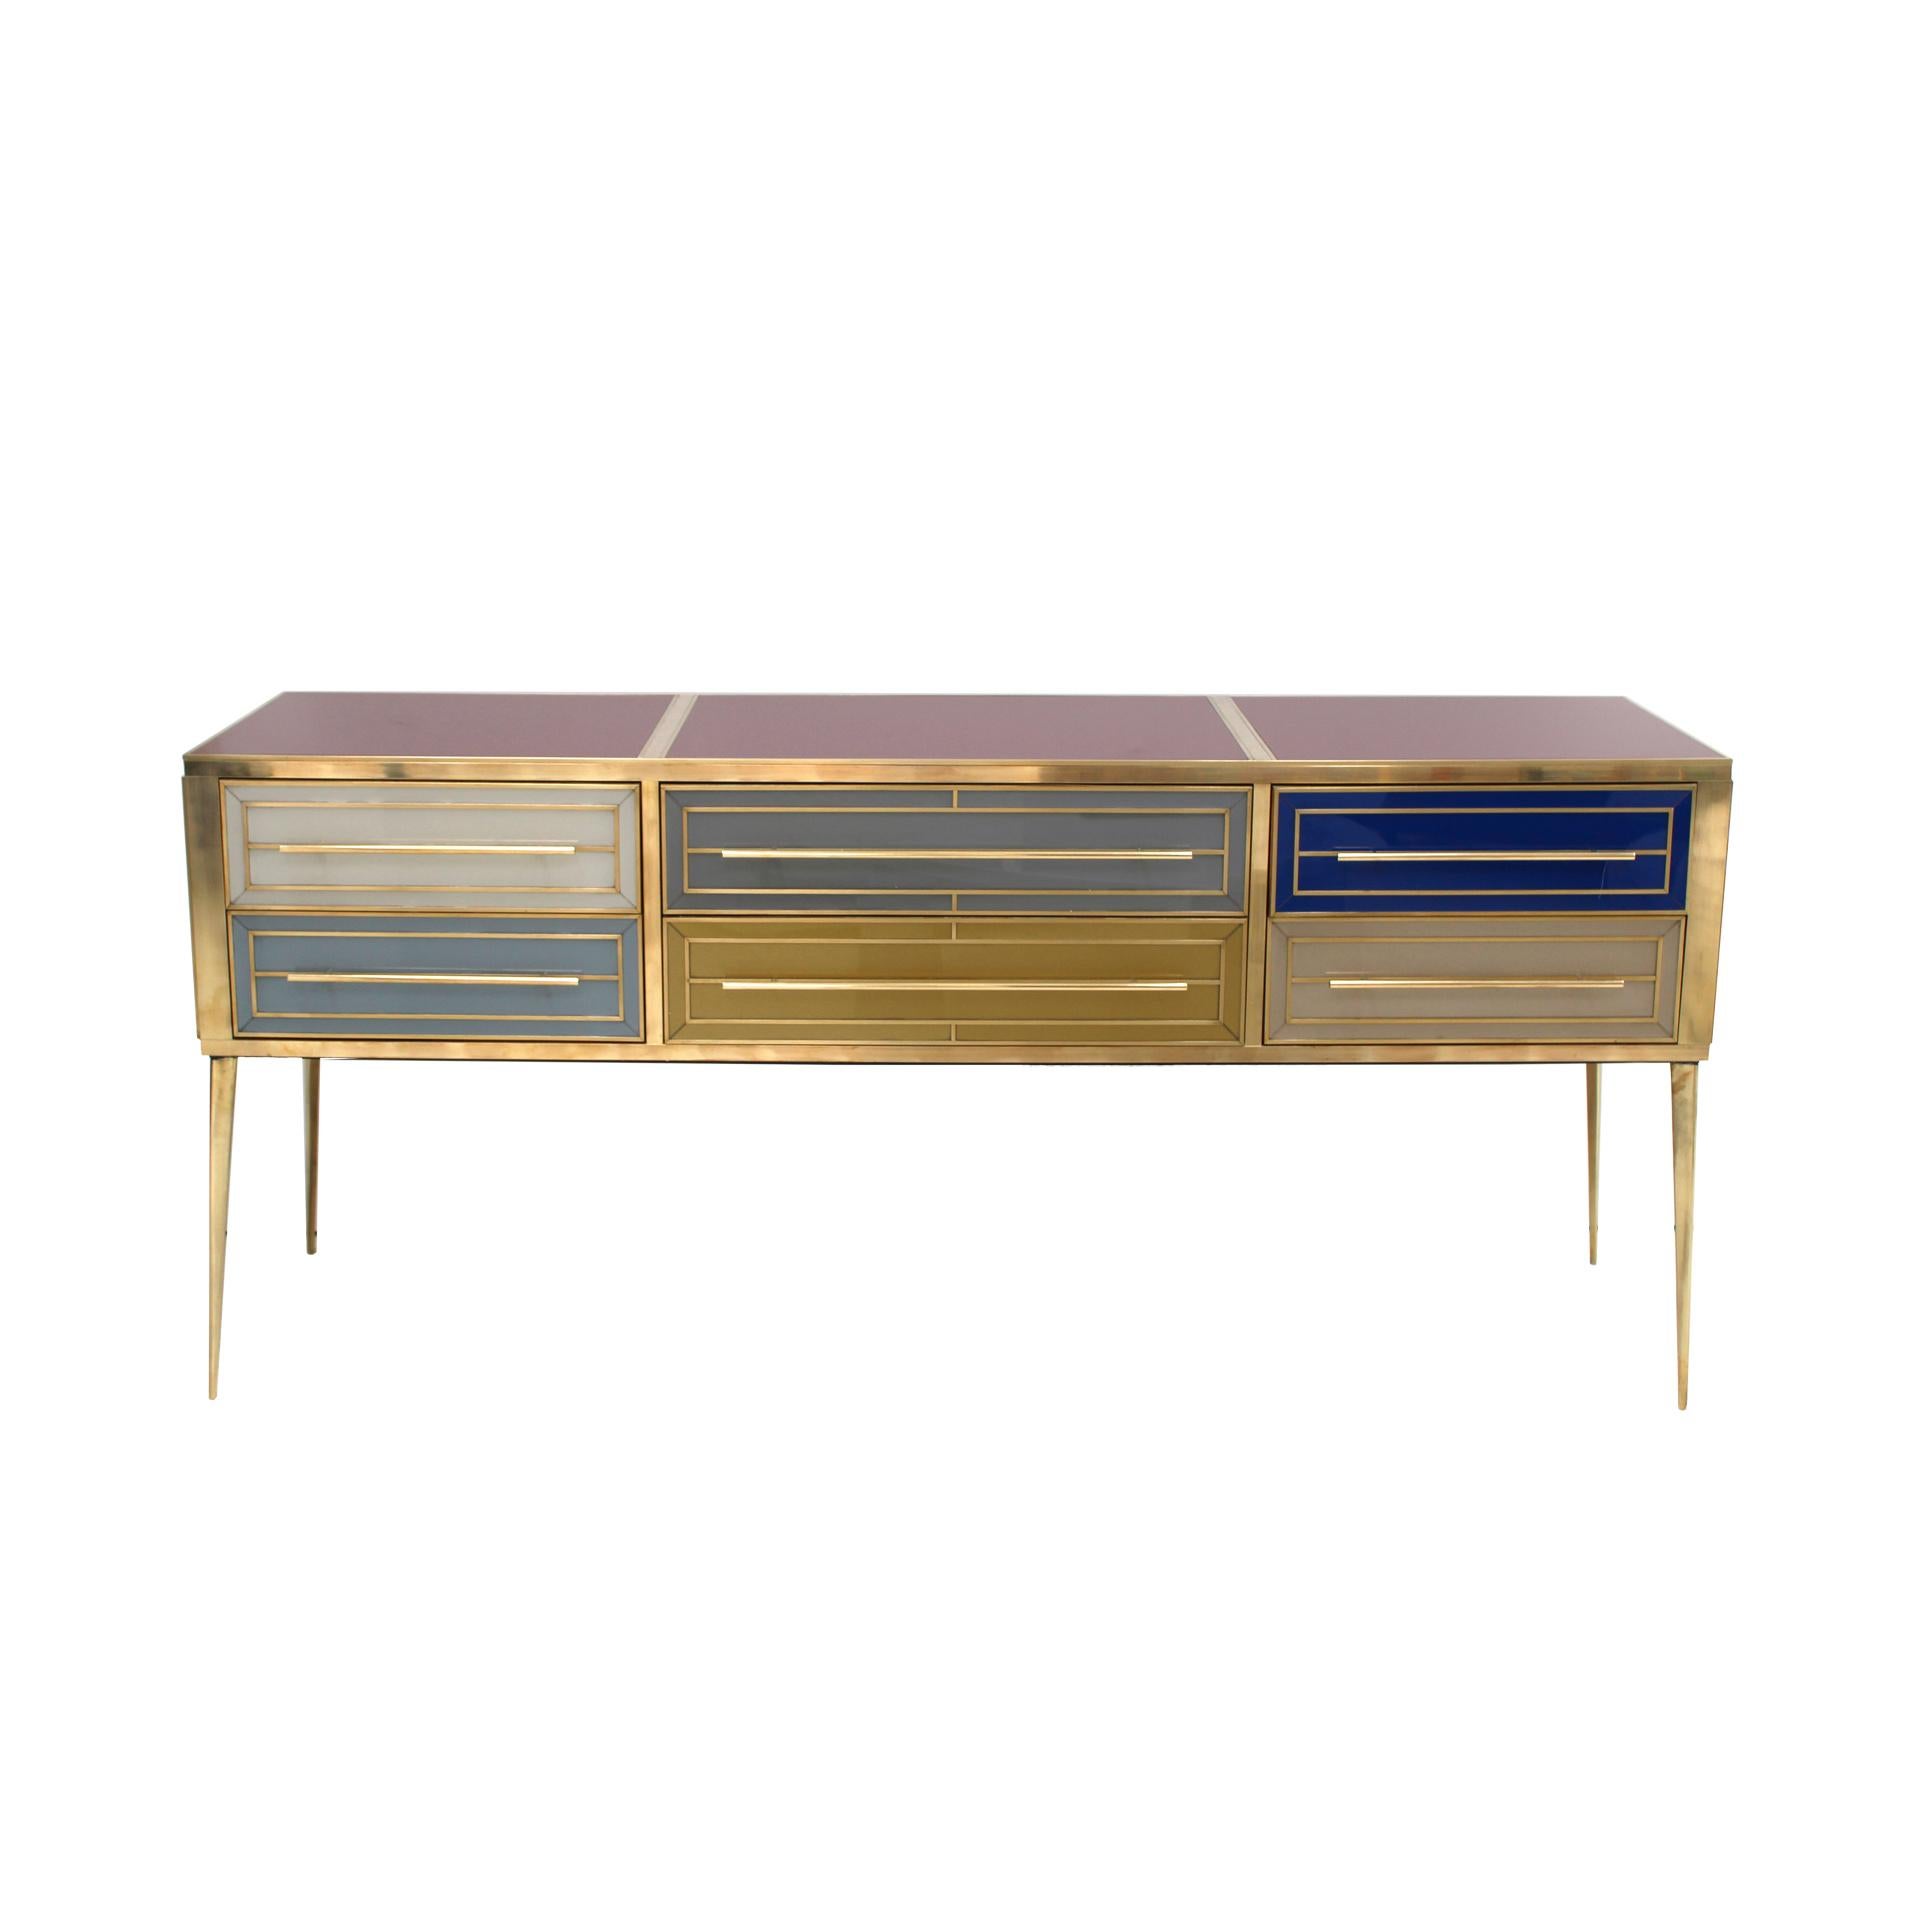 Sideboard composed of 6 drawers with an original structure from the 50s made of solid wood and covered with colored glass. Handles, legs and profiles made of brass. Italy, 1950s.

Our main target is customer satisfaction, so we include in the